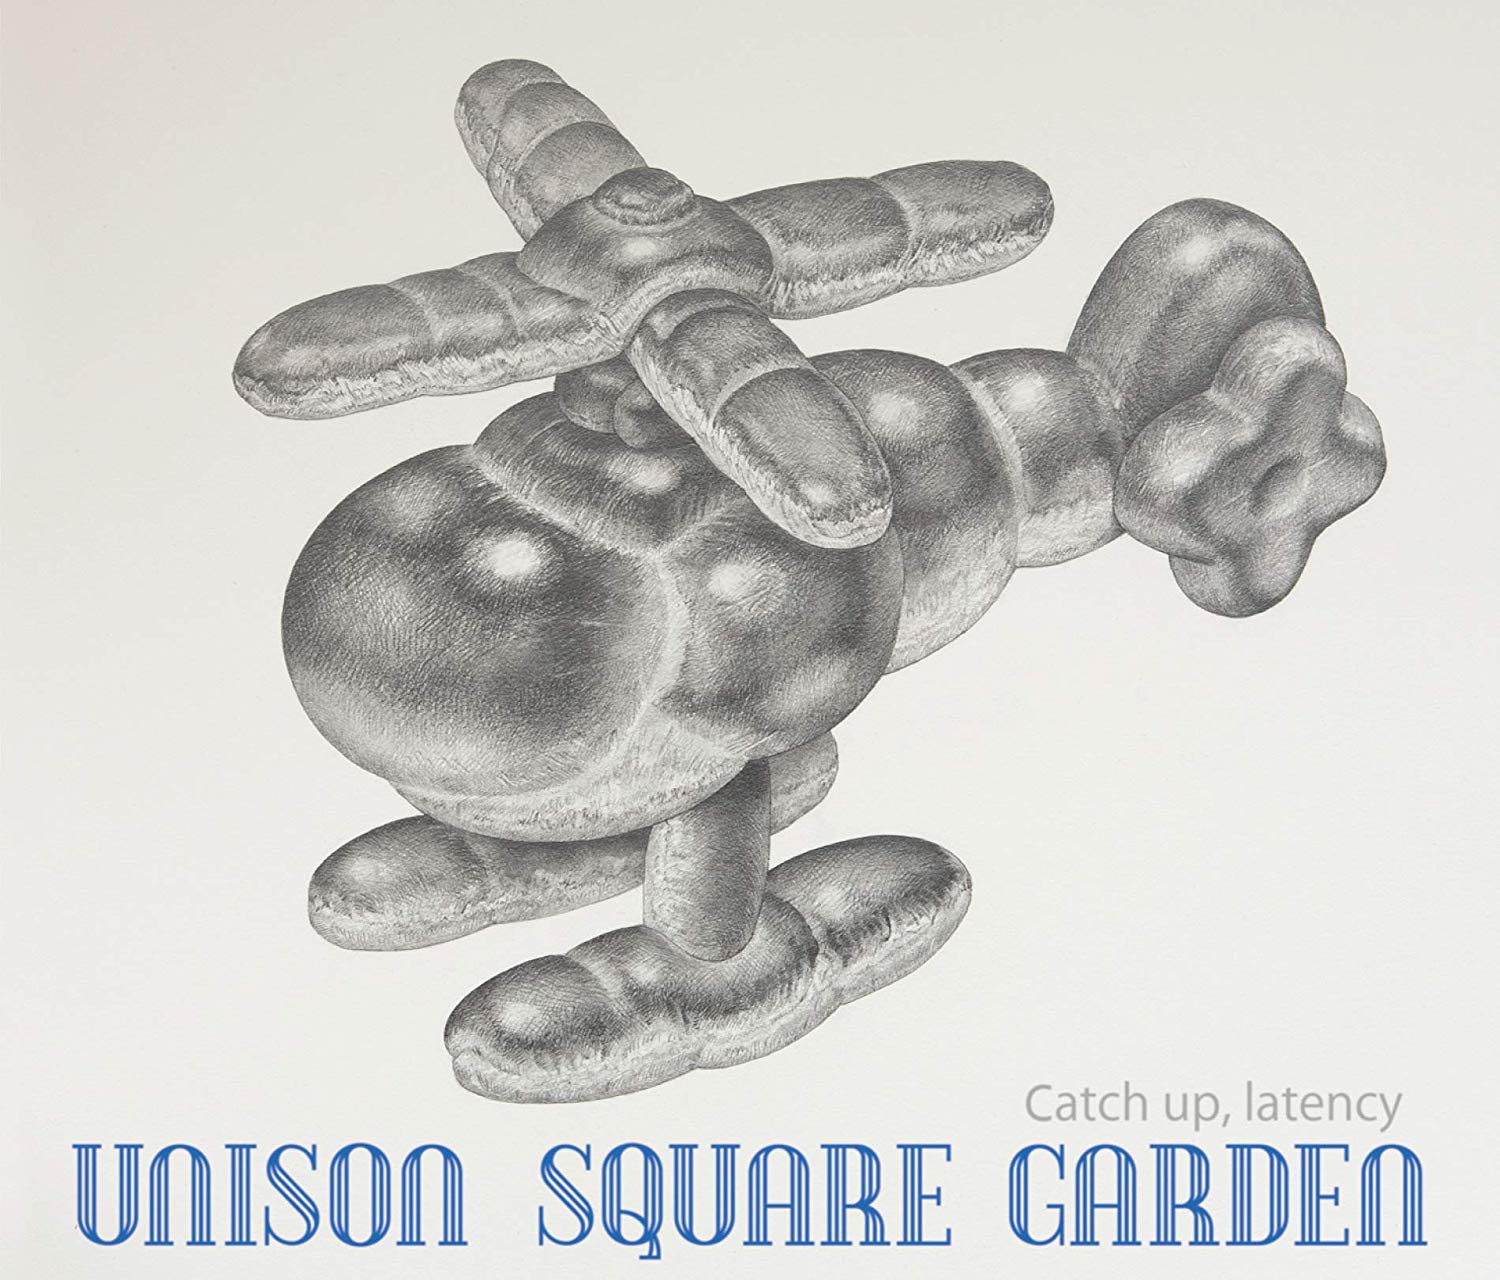 UNISON SQUARE GARDEN - Catch up, latency